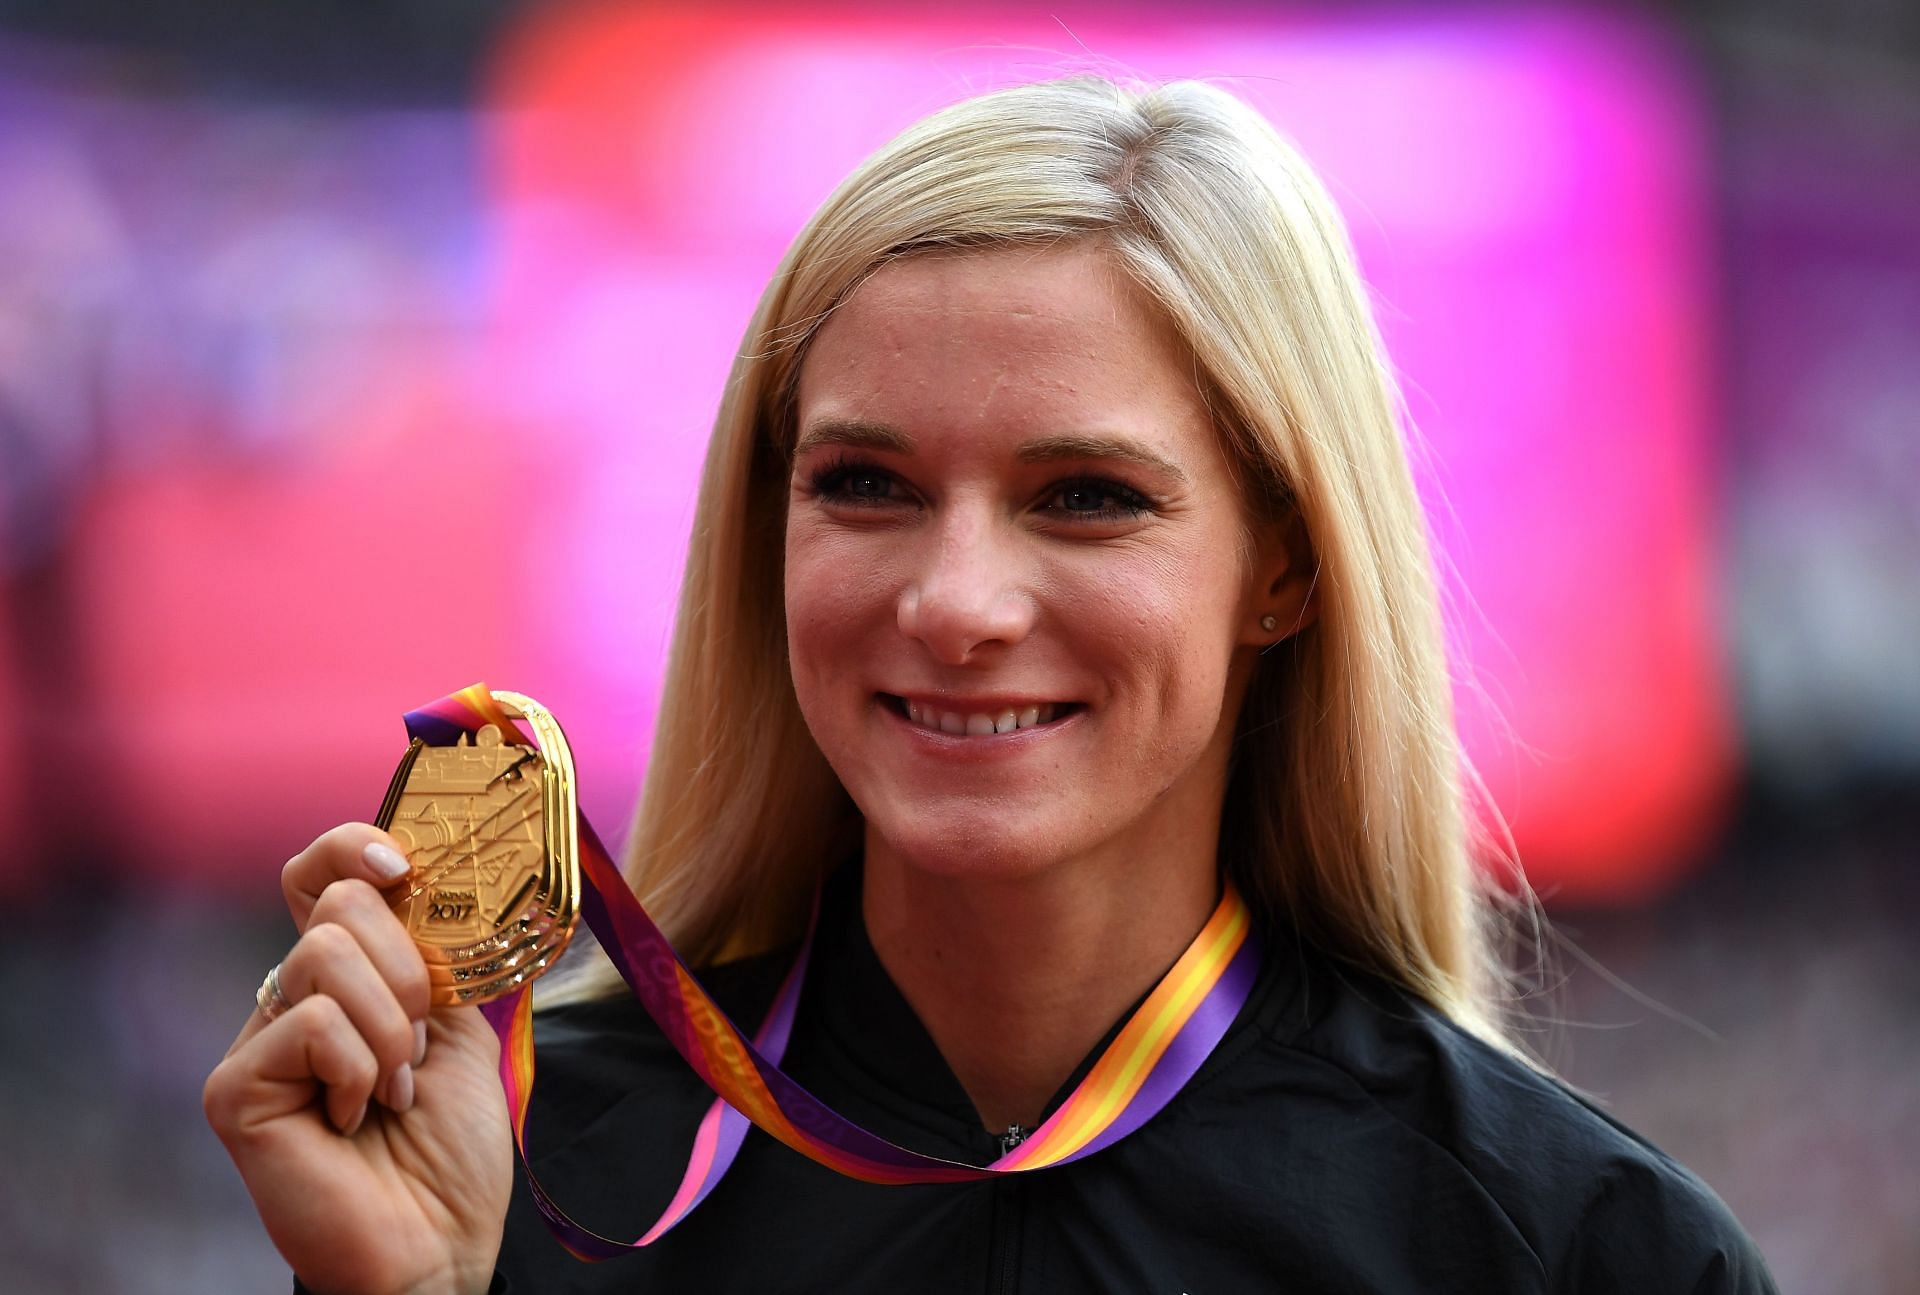 Emma Coburn poses with her gold medal for the Women&#039;s 3000 metres Steeplechase at the 16th IAAF World Athletics Championships London 2017 in London, United Kingdom. (Photo by Matthias Hangst/Getty Images)